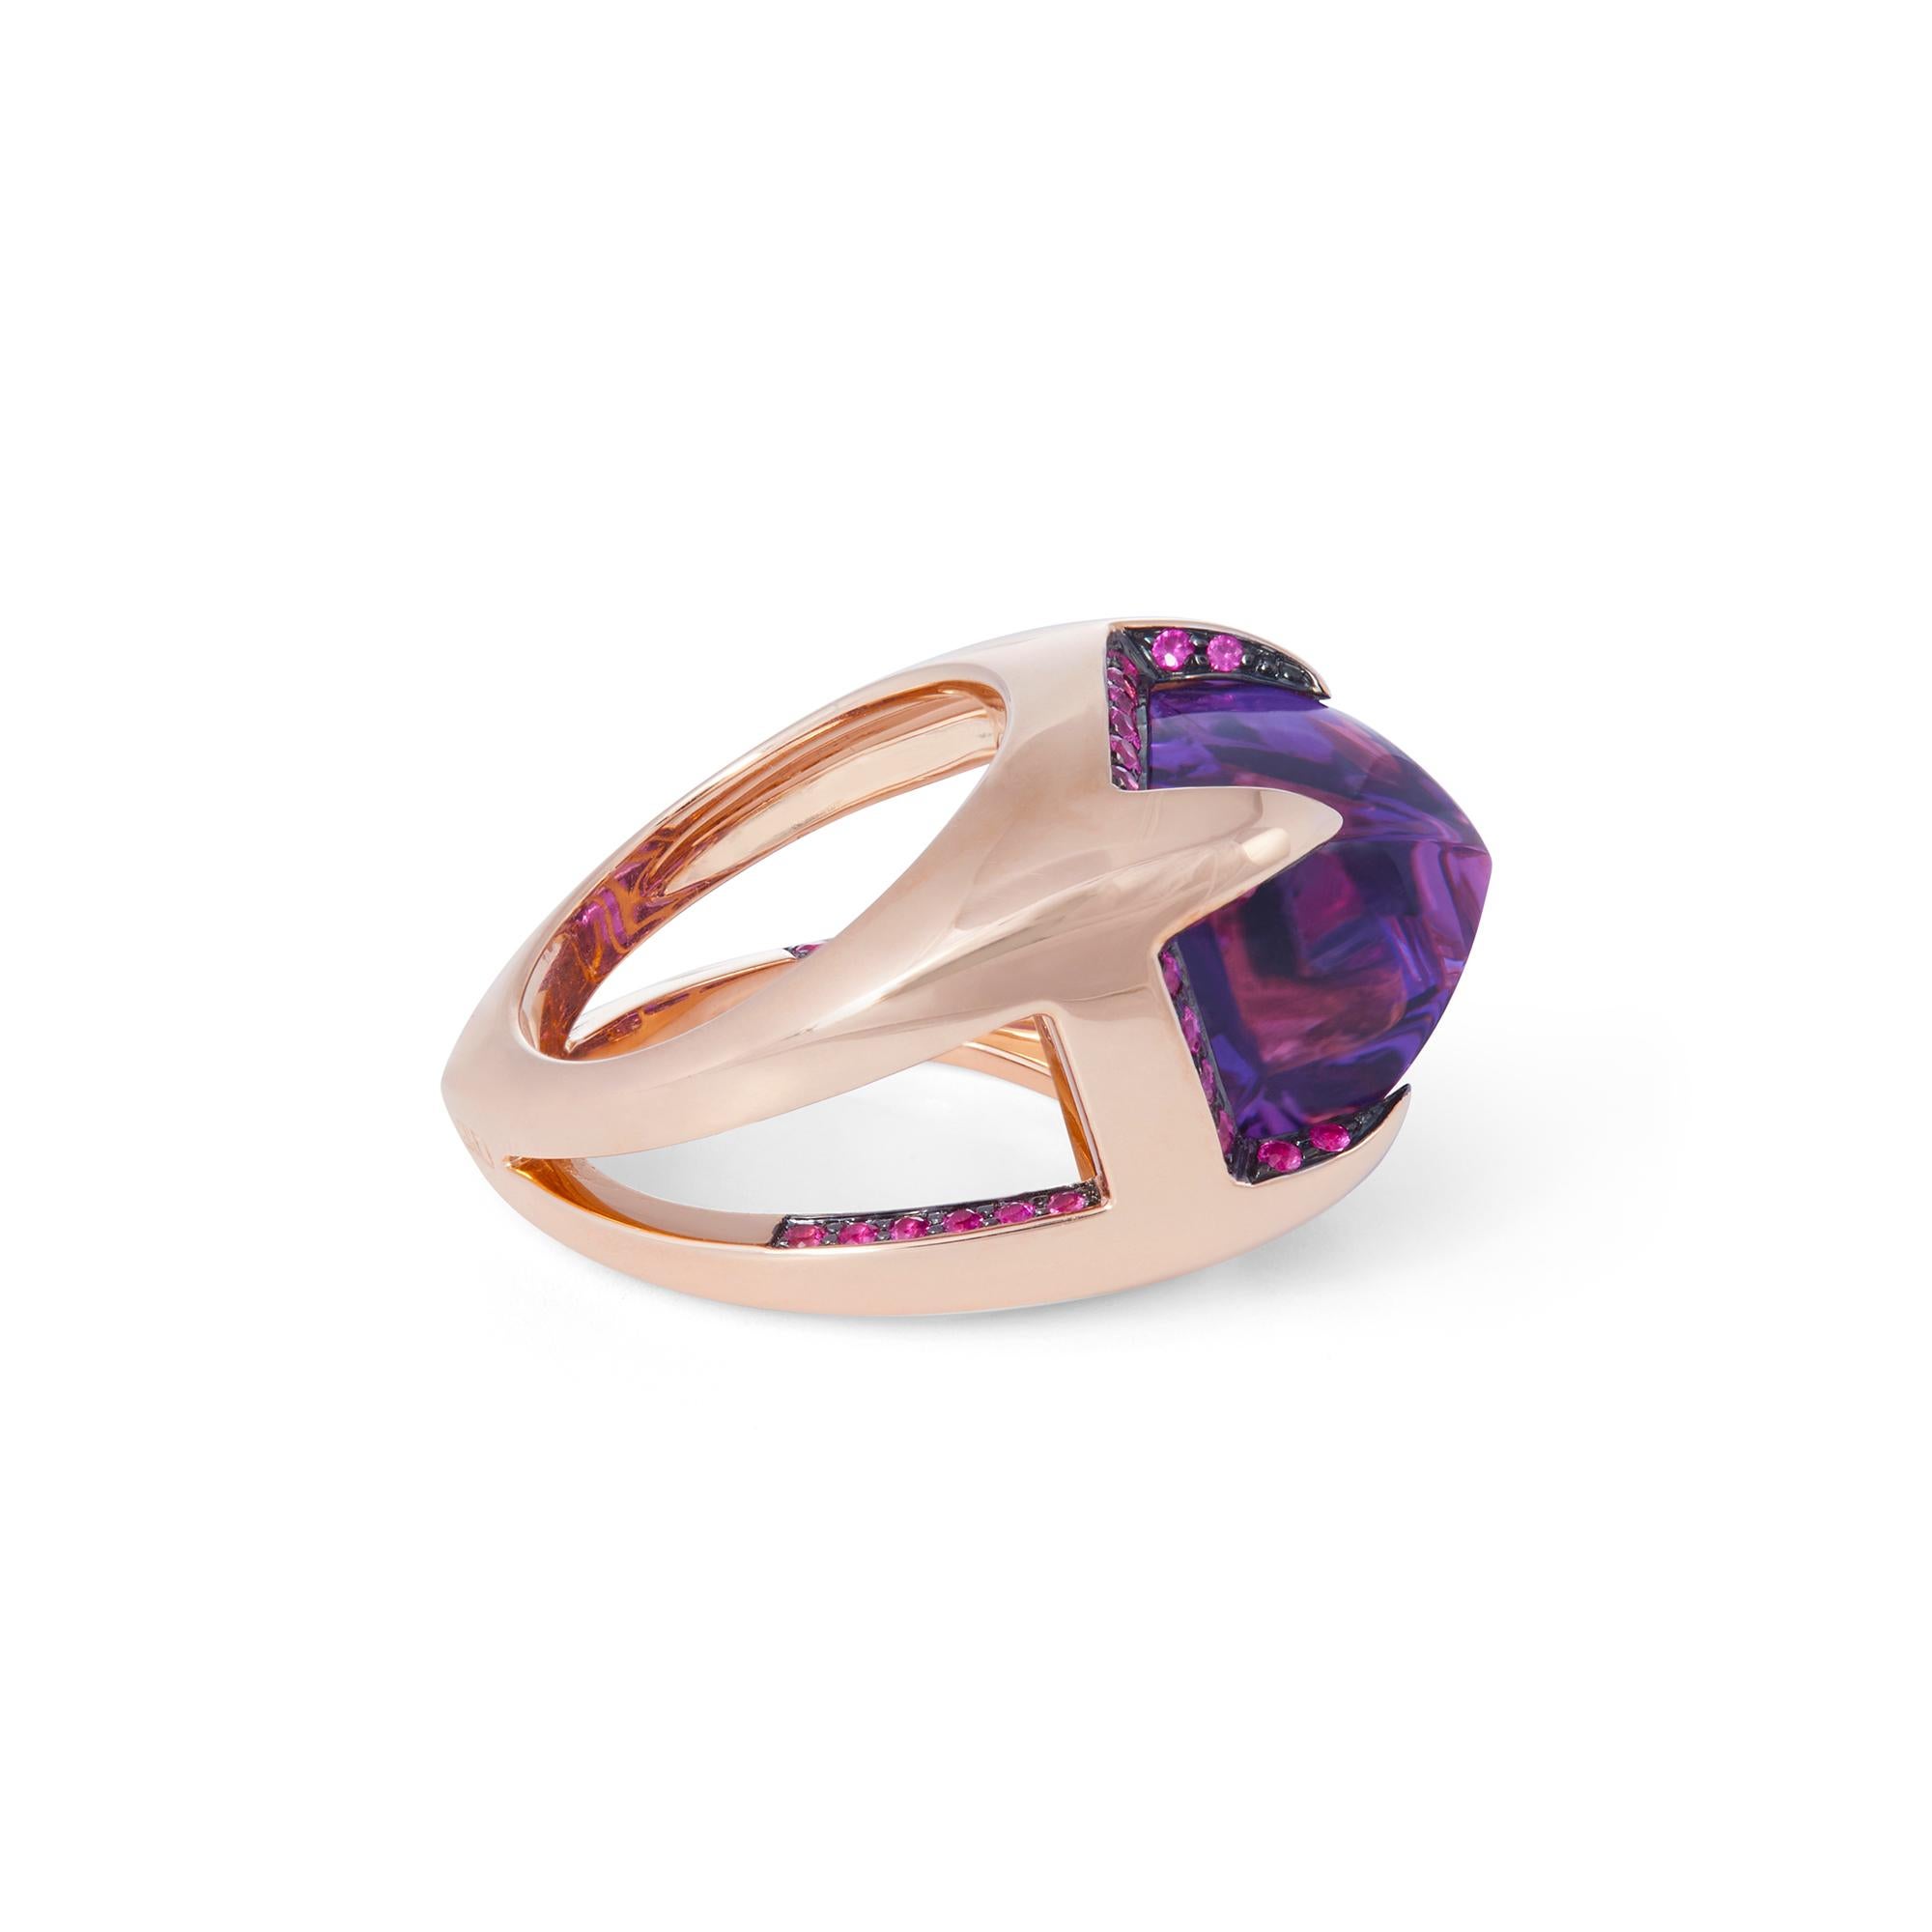 Sugarloaf Cabochon Sugarloaf Amethyst and Pink Sapphire Cocktail Ring